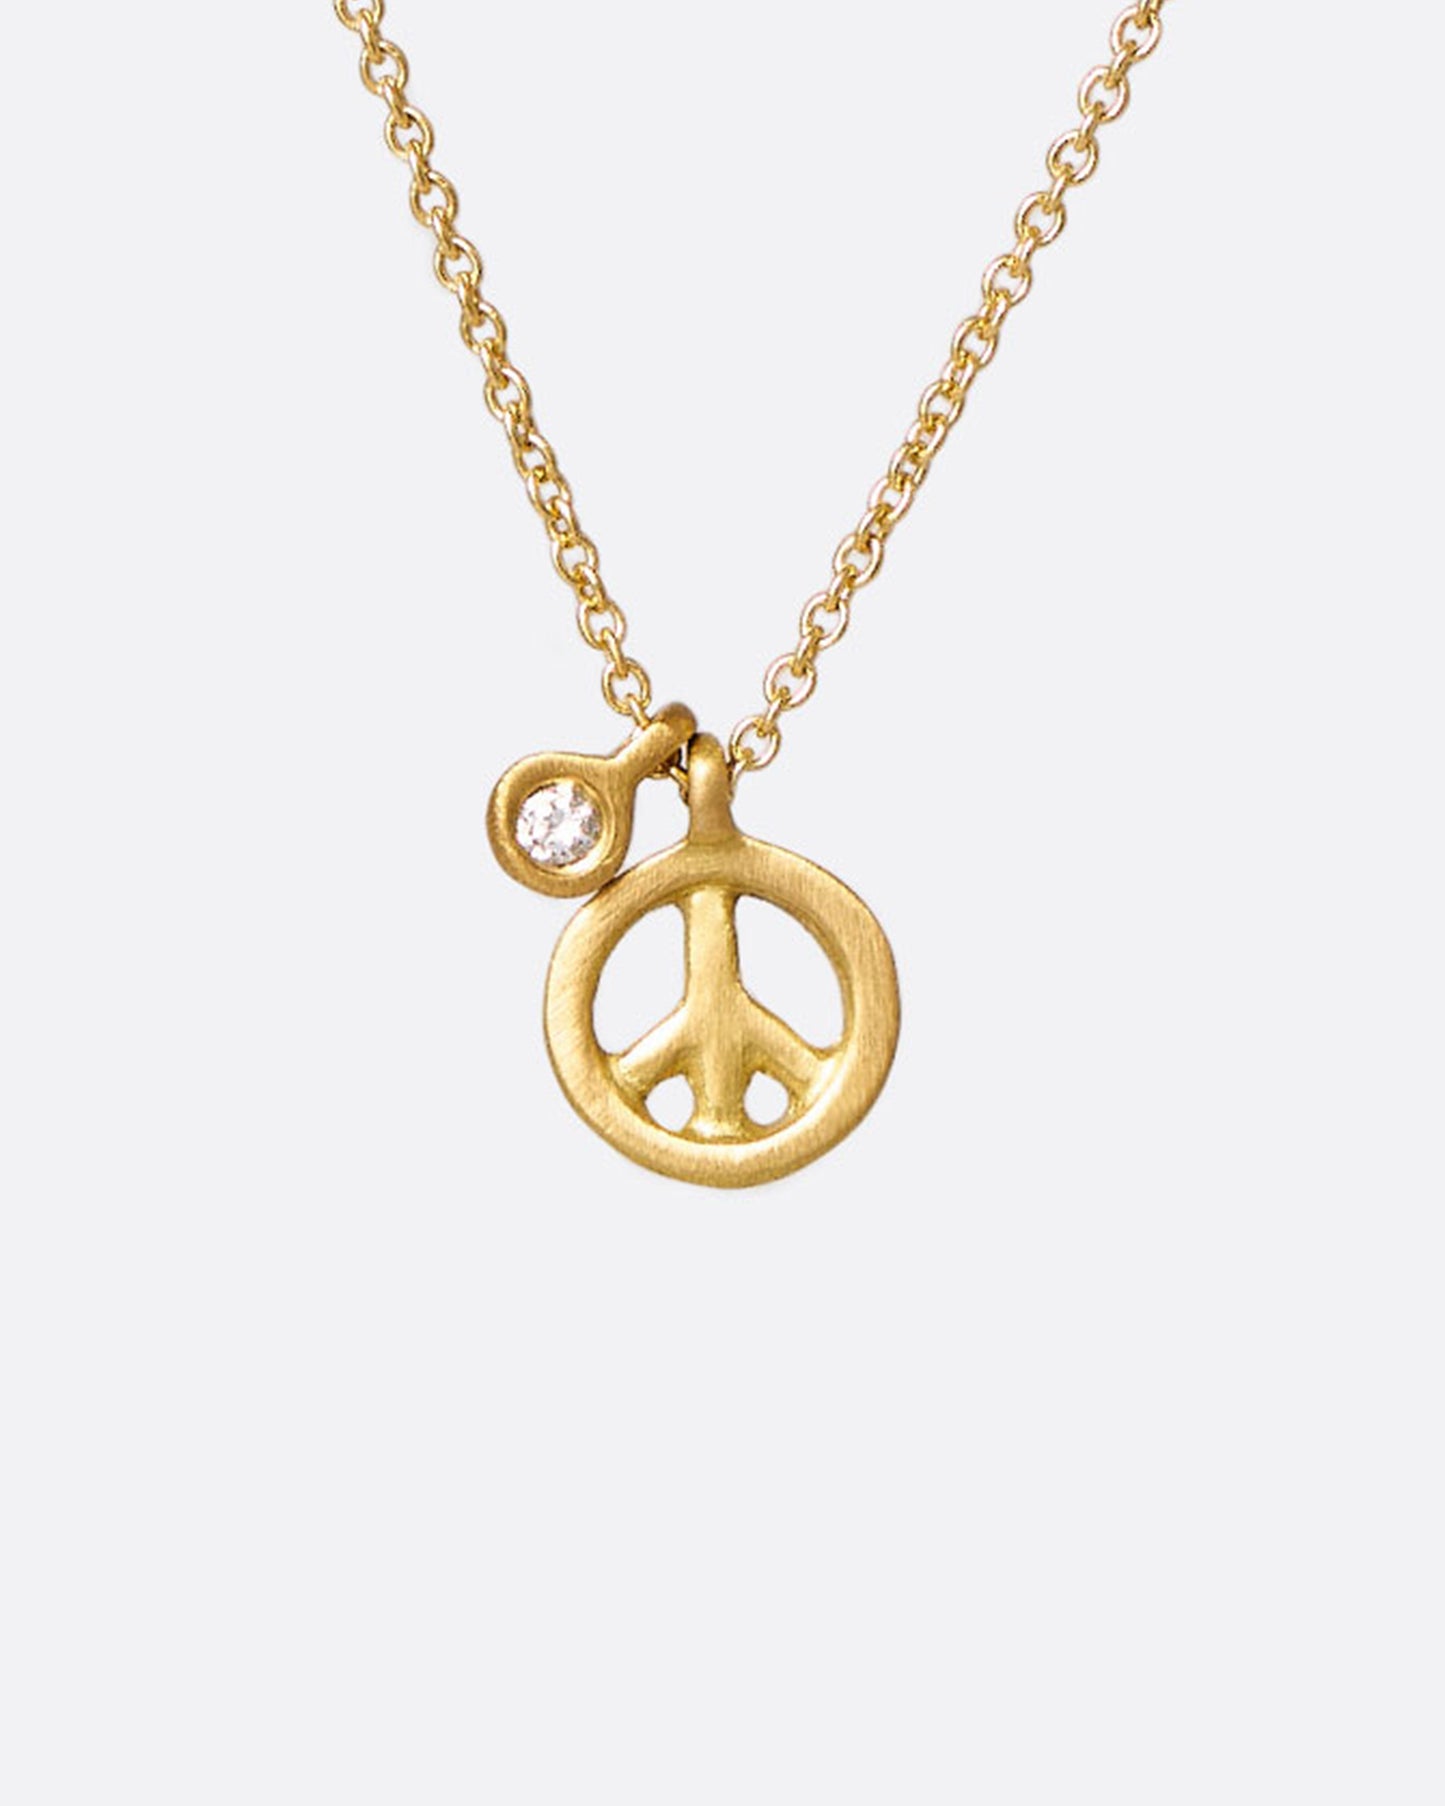 A dainty necklace, perfect for layering, with a peace sign pendant and a bezel set diamond tag.